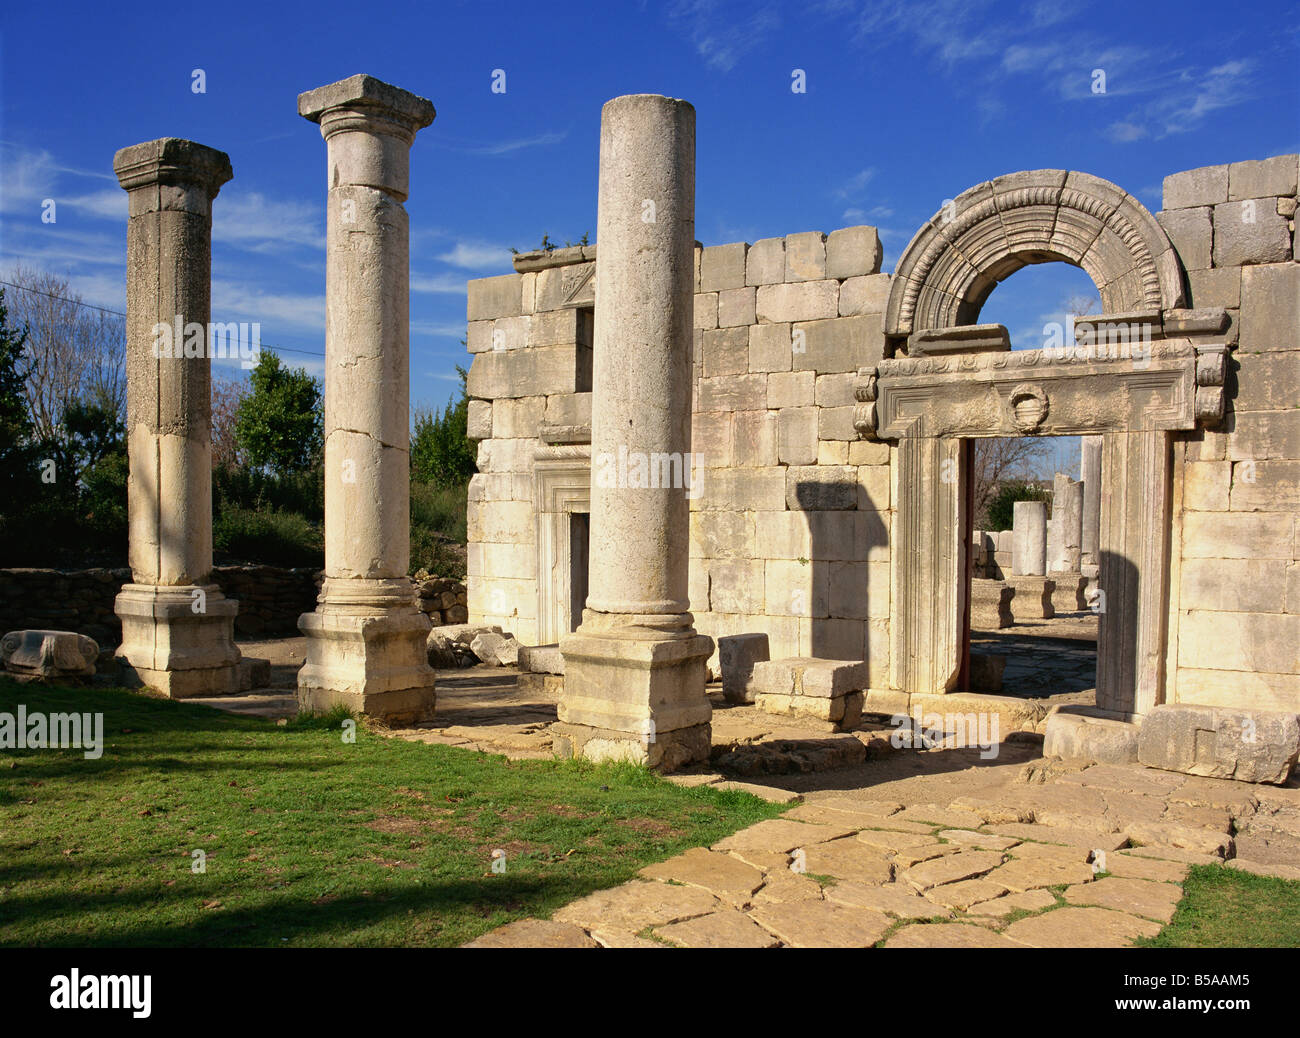 Columns, walls and door with arch in the 2nd Temple Synagogue at Kfar Baram in Upper Galilee, Israel, Middle East Stock Photo